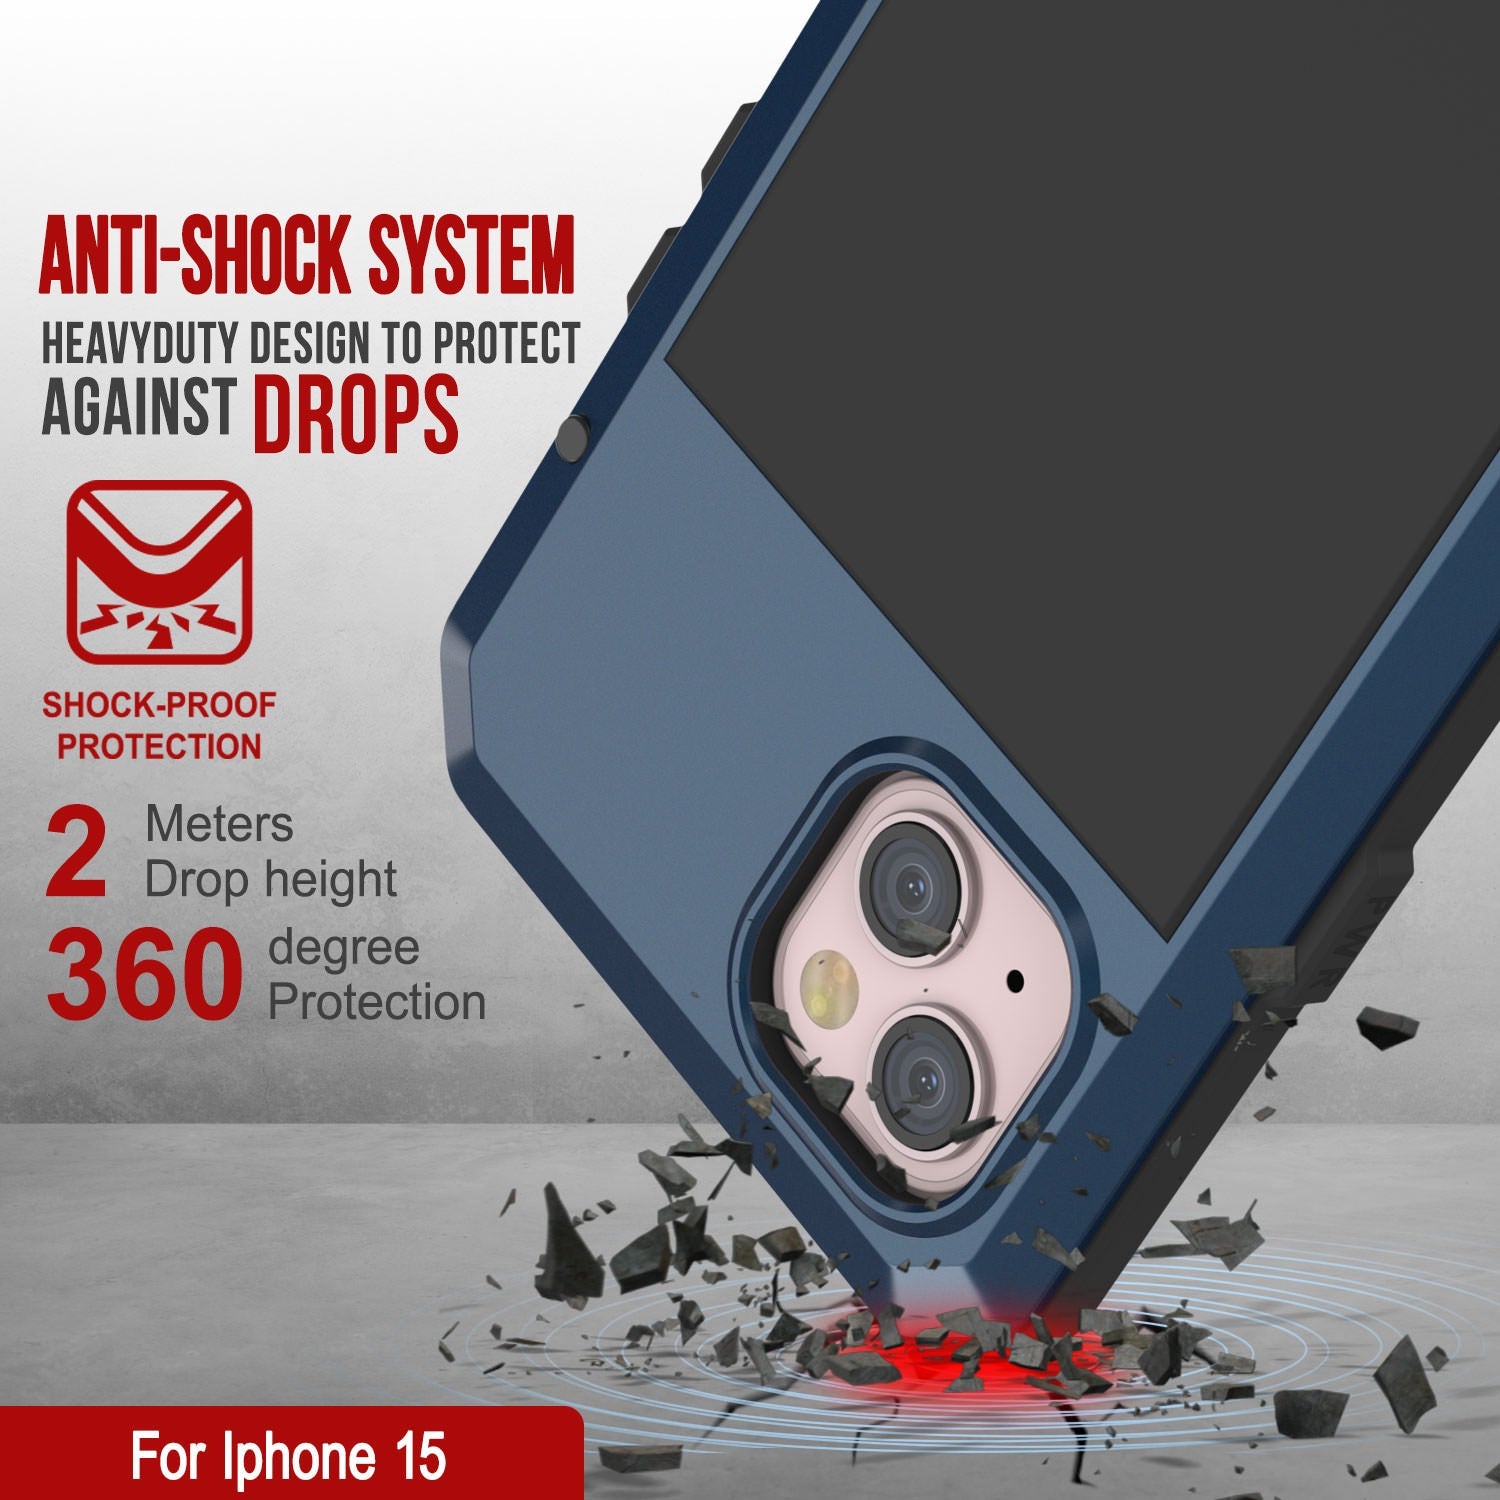 iPhone 15 Metal Case, Heavy Duty Military Grade Armor Cover [shock proof] Full Body Hard [Blue]